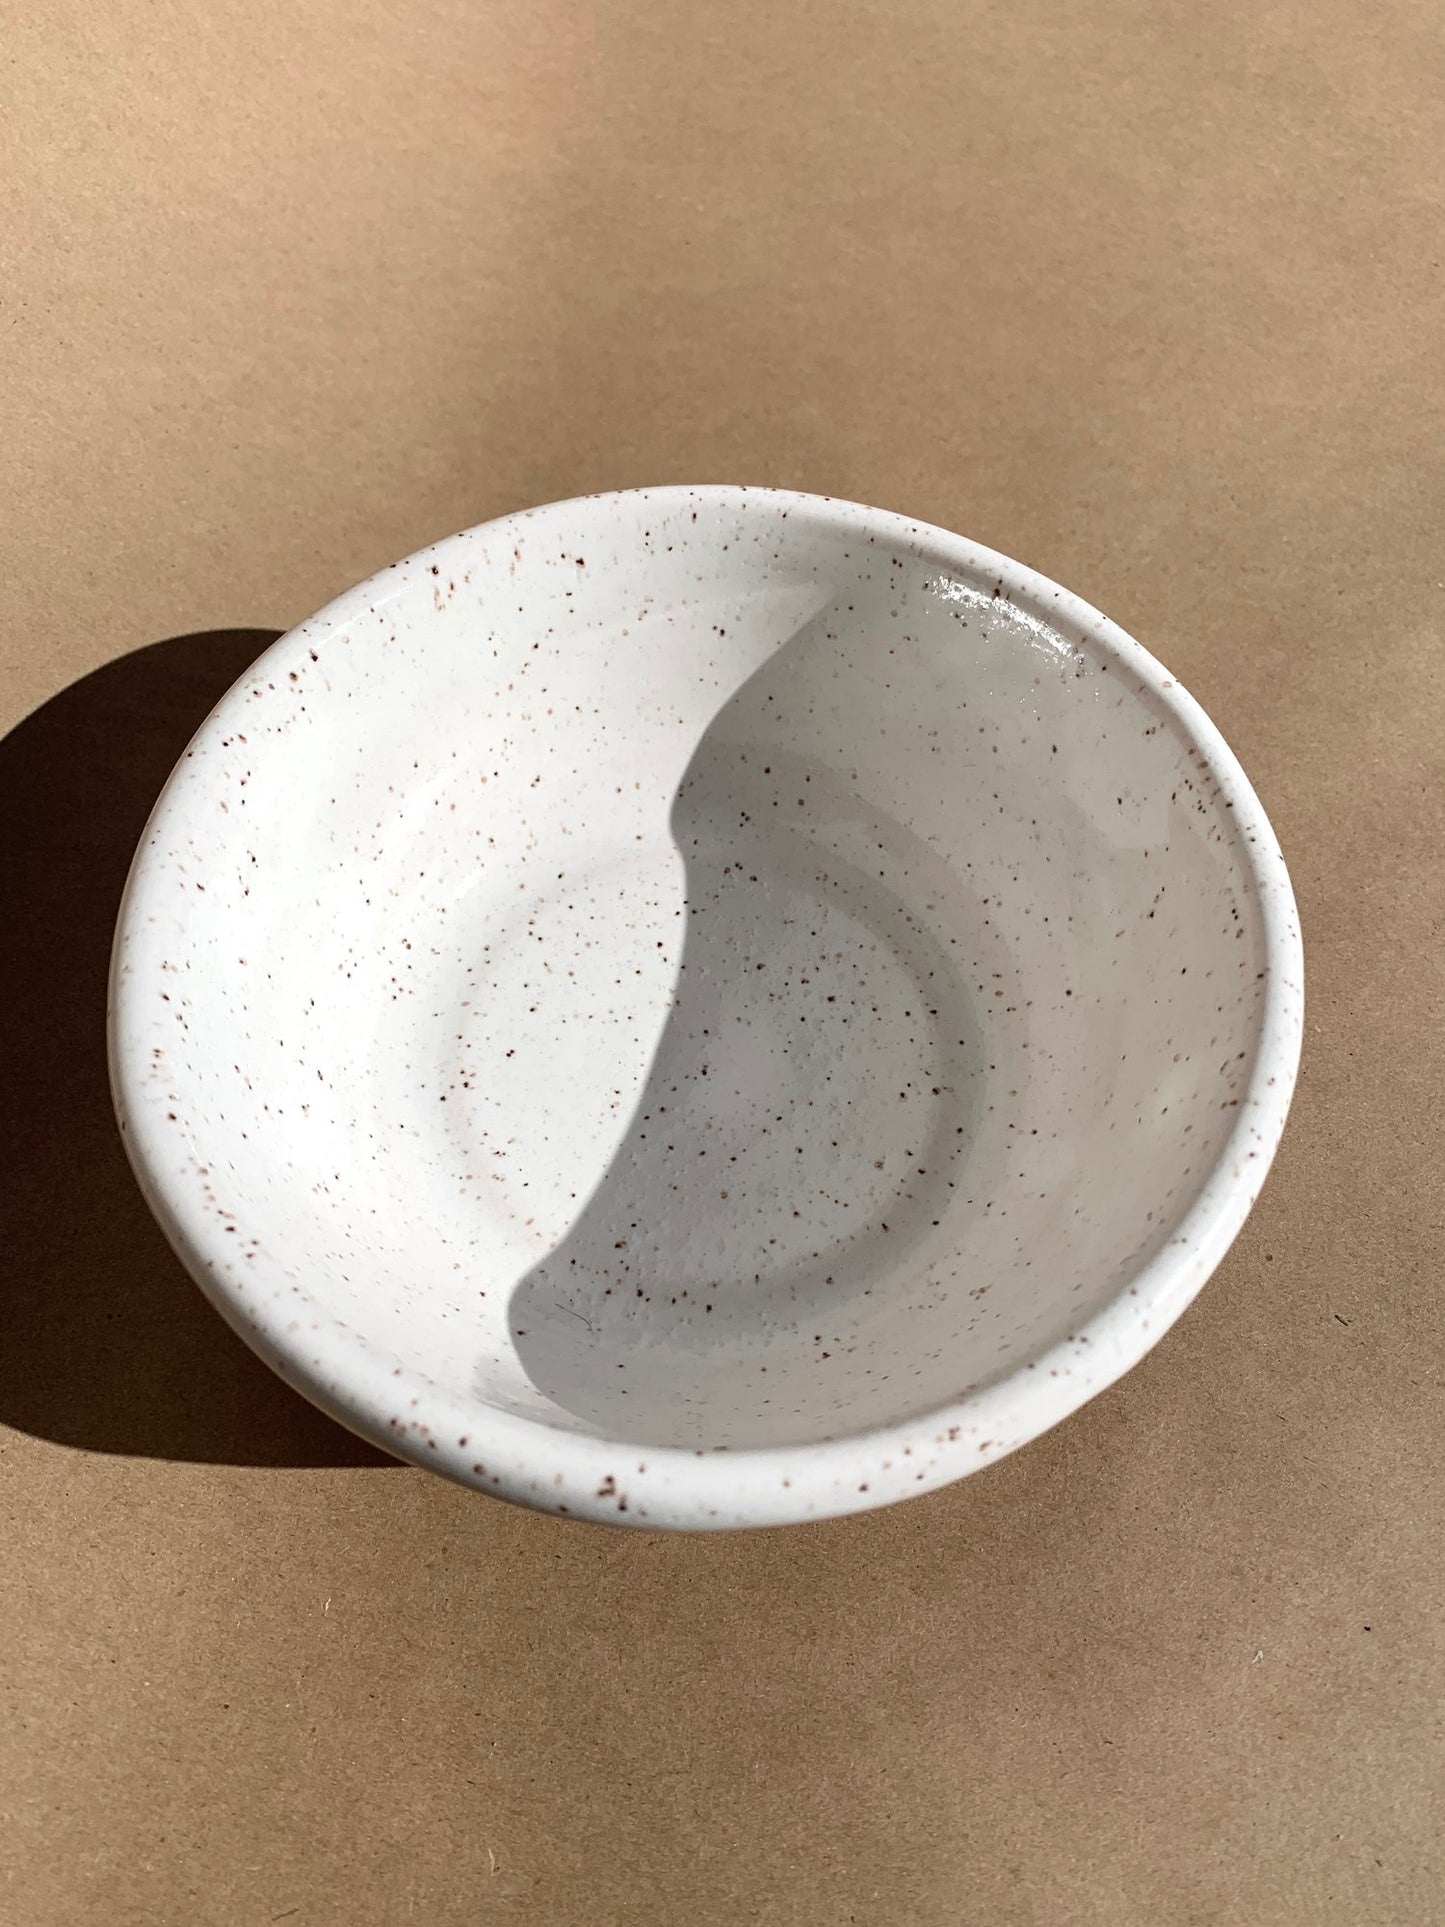 Beautiful smooth bowl great for soup and pasta or simply use it as a catchall. Hand thrown speckled clay with a white gloss glaze.